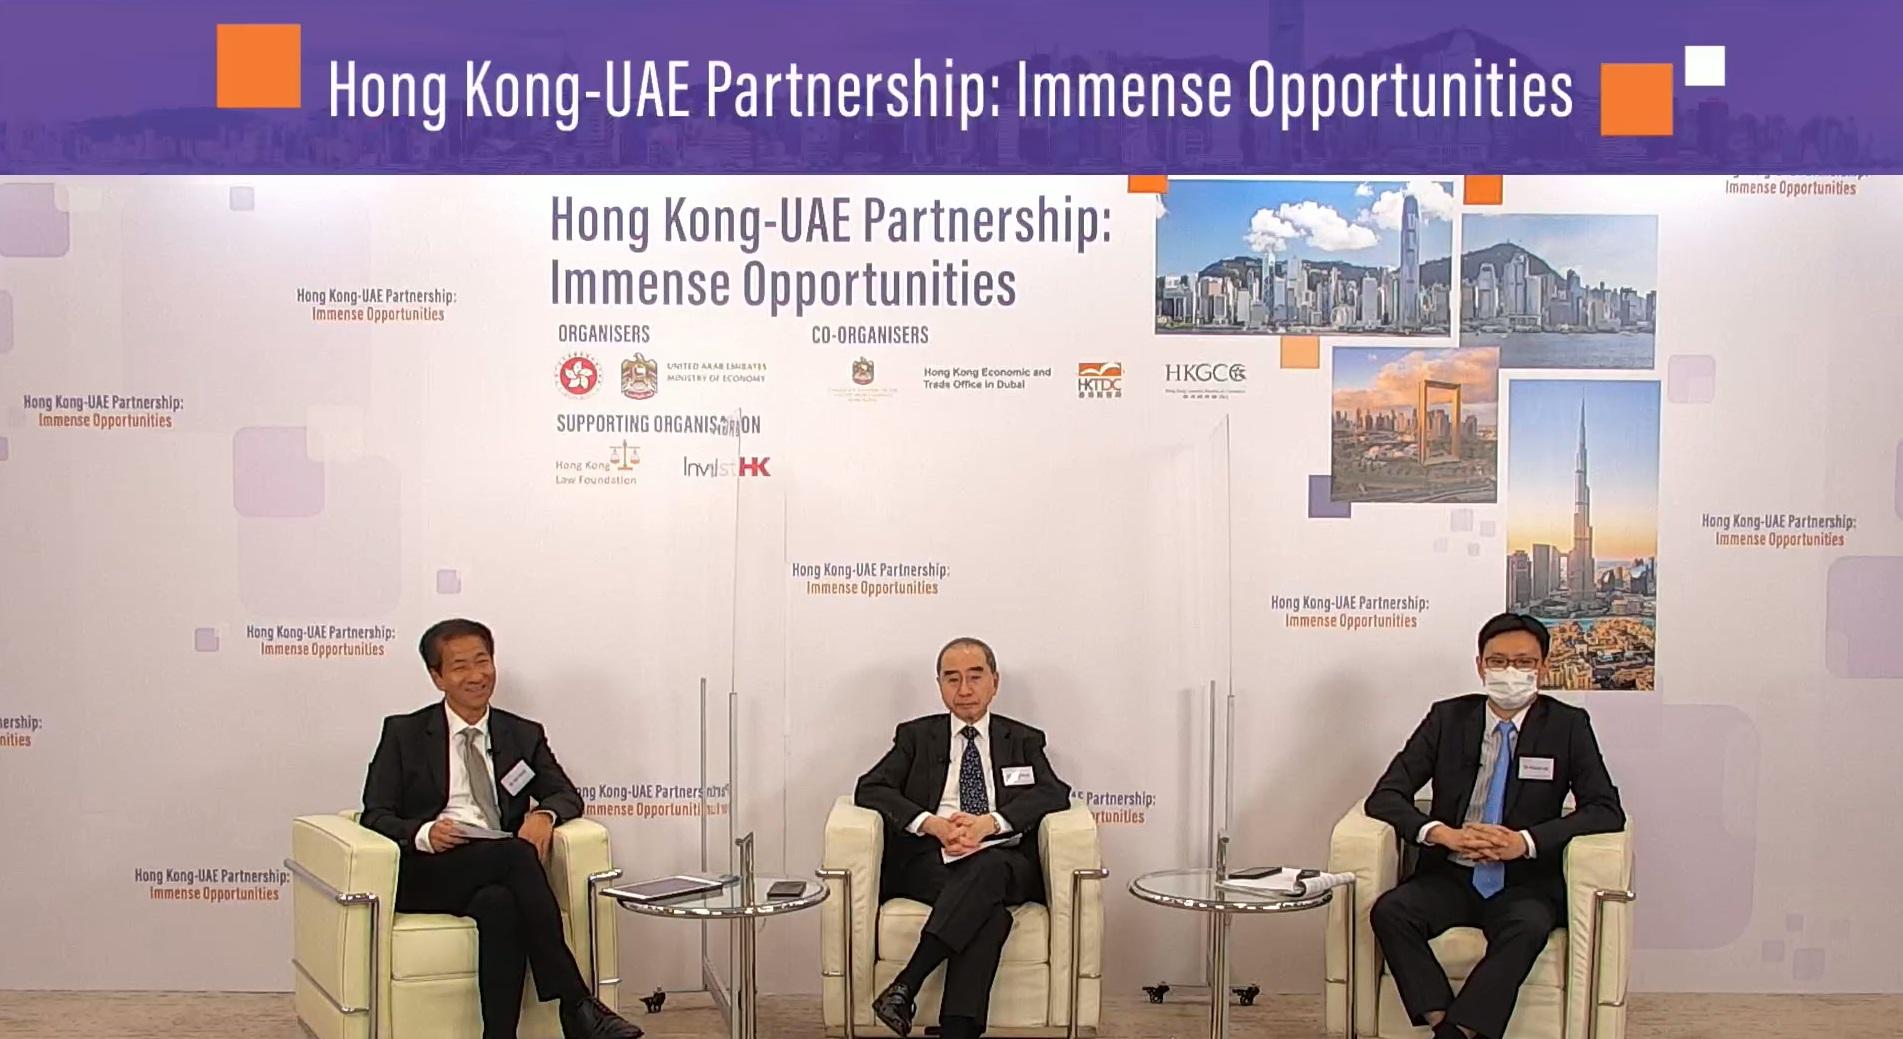 The Commerce and Economic Development Bureau and the Ministry of Economy of the United Arab Emirates (UAE) jointly organised a webinar titled "Hong Kong-UAE Partnership: Immense Opportunities" today (May 24) to explore collaboration opportunities in such fields as trade, investment and professional services. Photo shows the Commissioner for Belt and Road, Mr Rex Chang (left), and panelists participating in the panel discussion at the webinar.